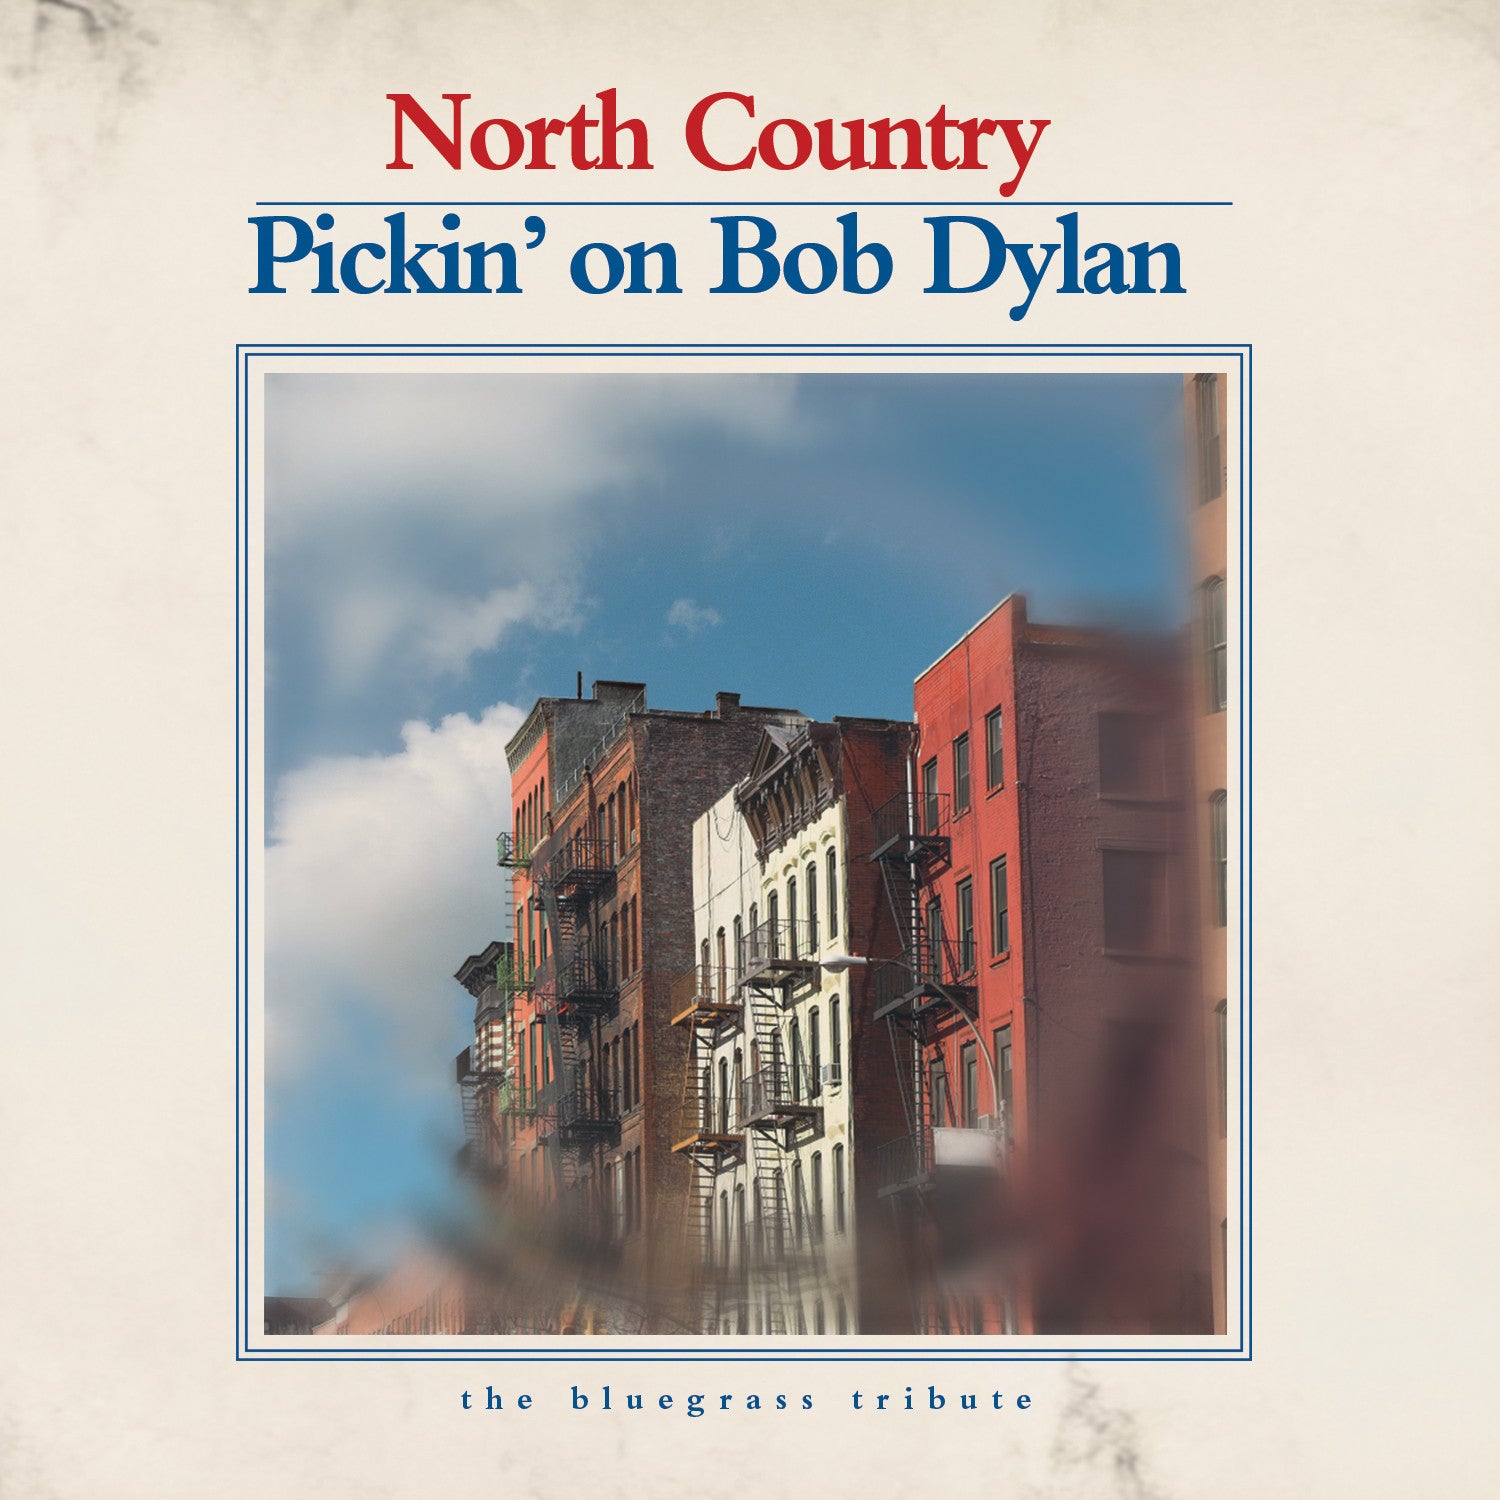 North Country: Pickin' On Bob Dylan - The Bluegrass Tribute